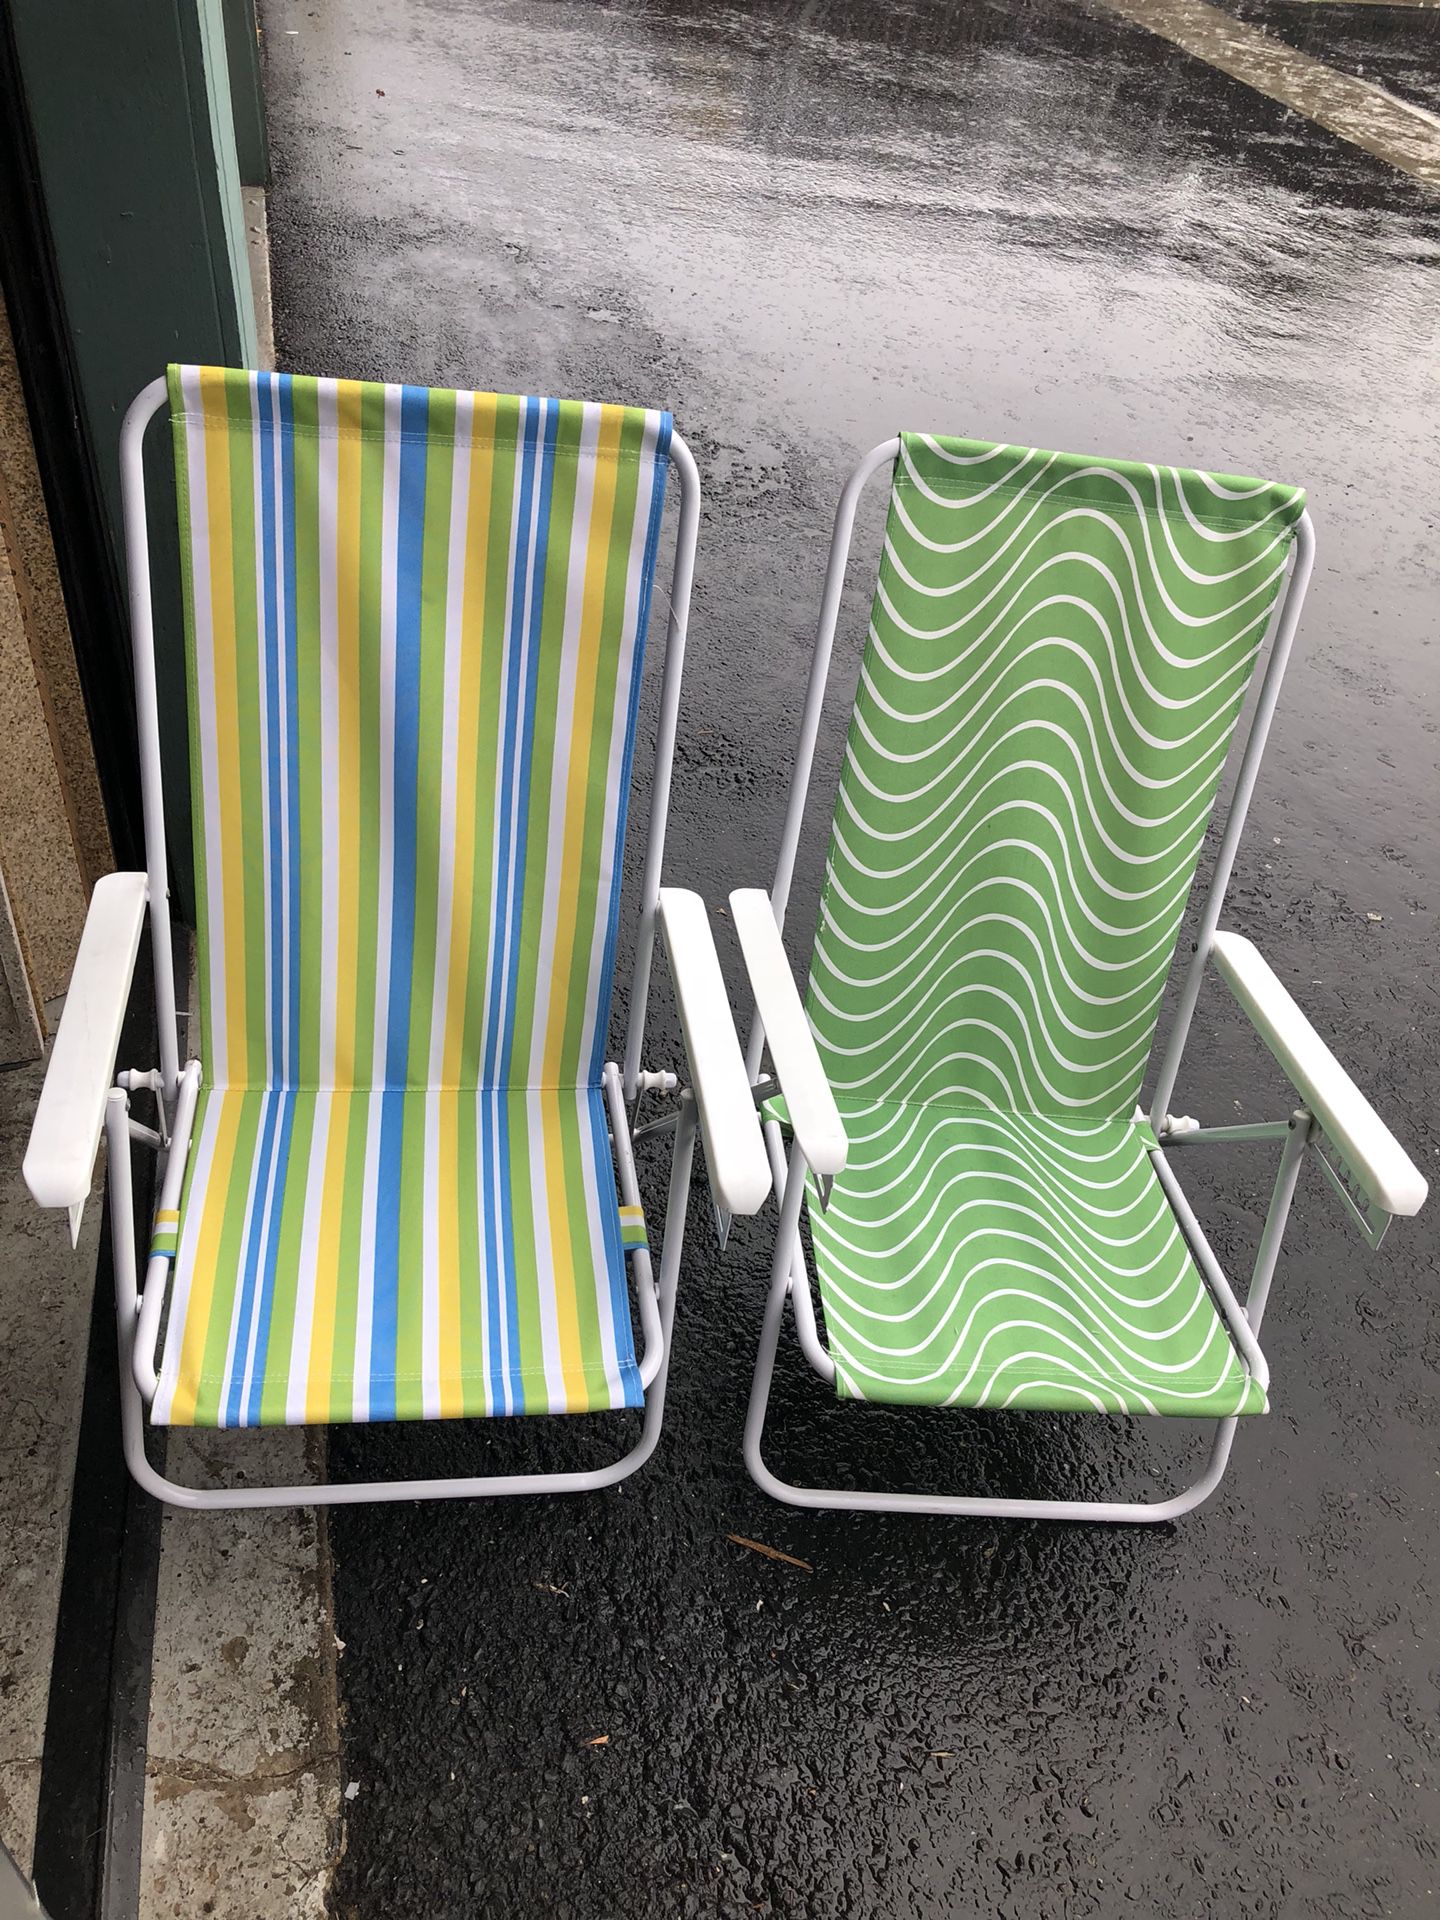 2Chairs for the beach in very good condition